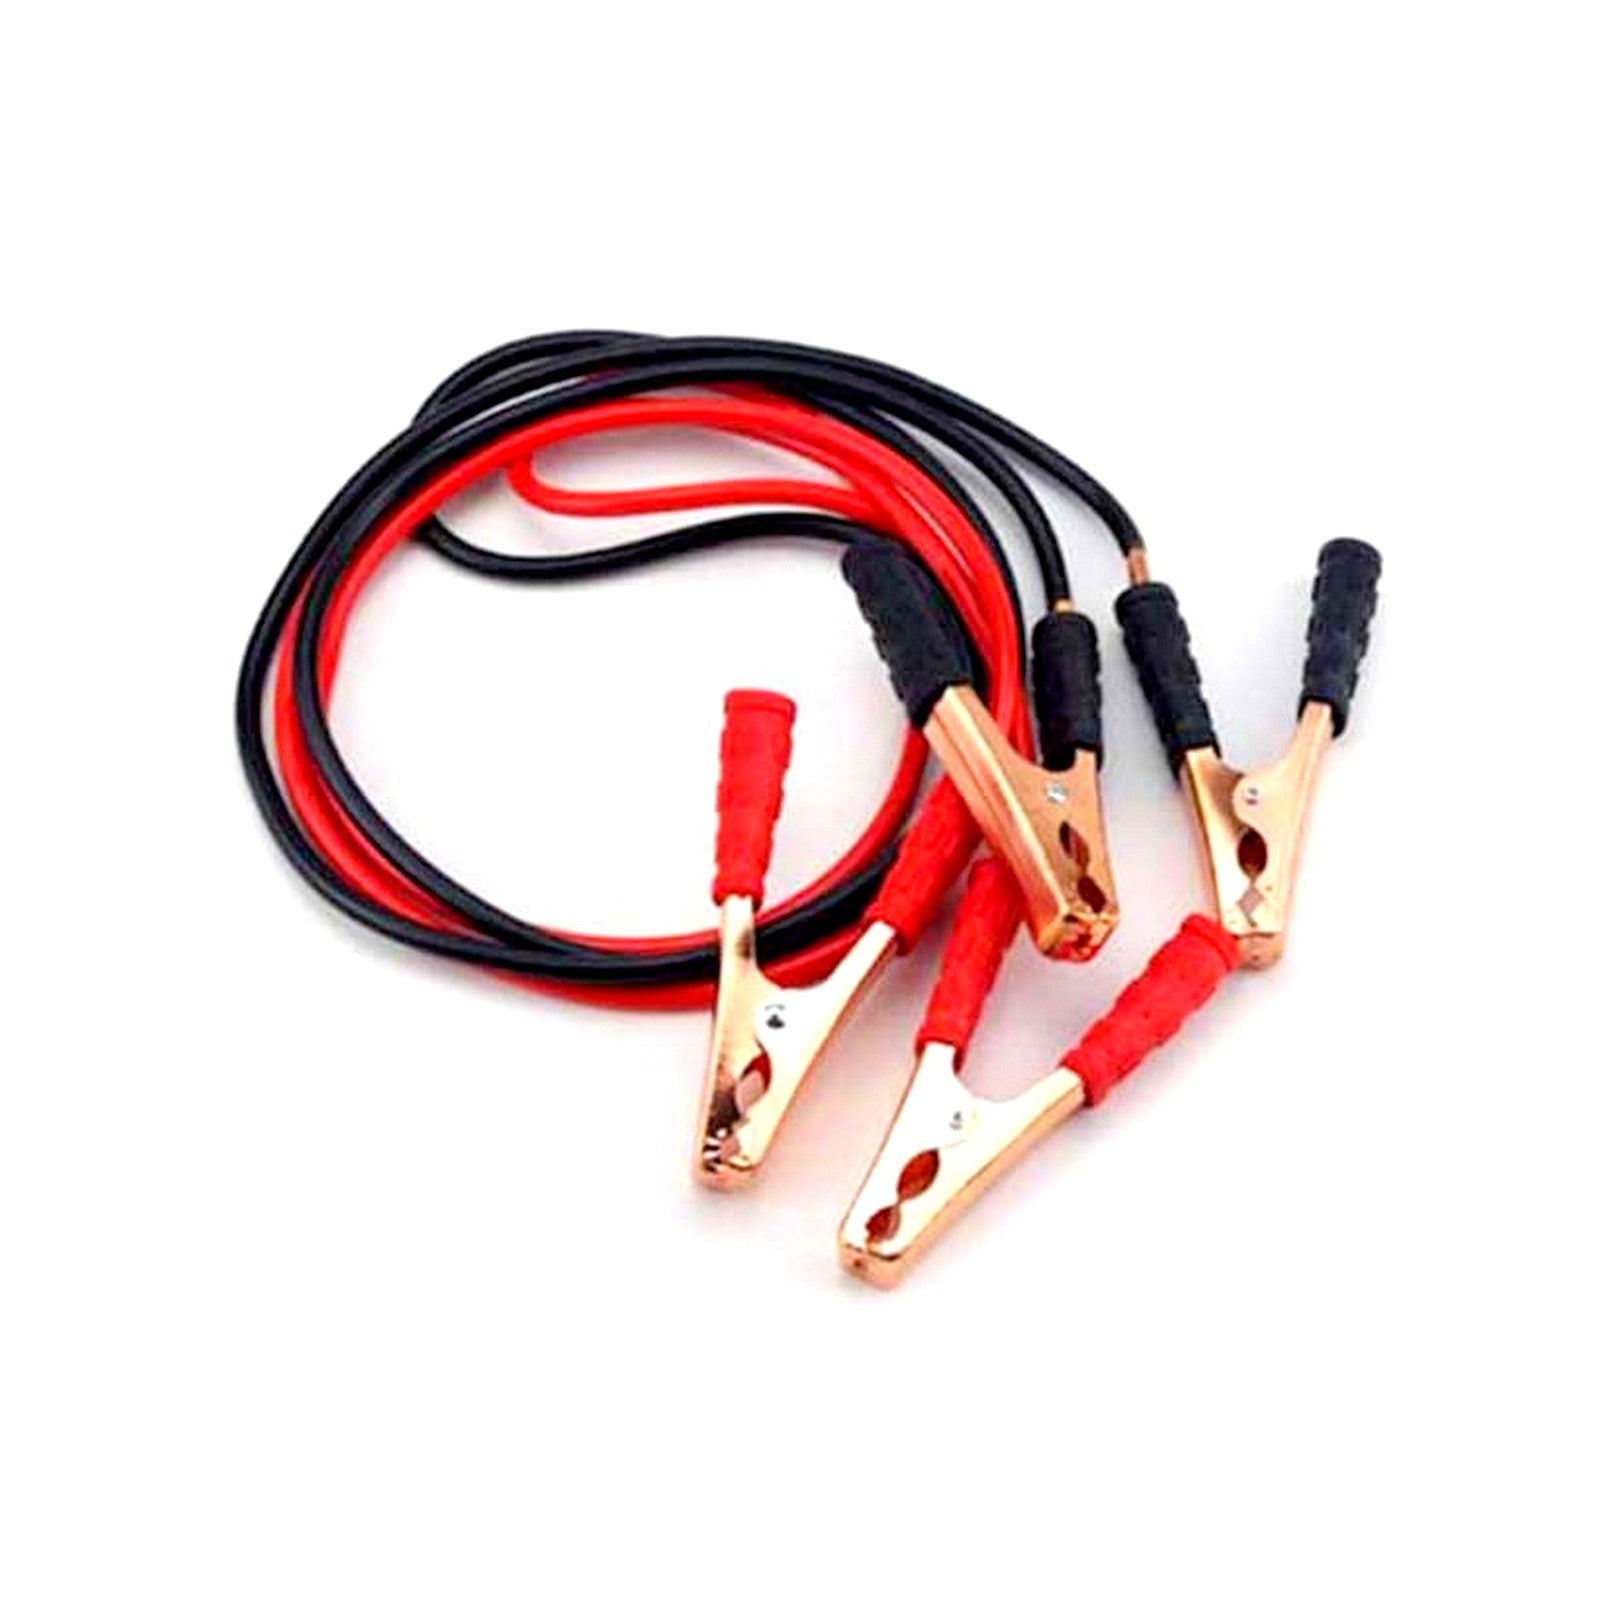 CAR BOOSTER CABLE, JUMP START CABLE PREMIUM QUALITY